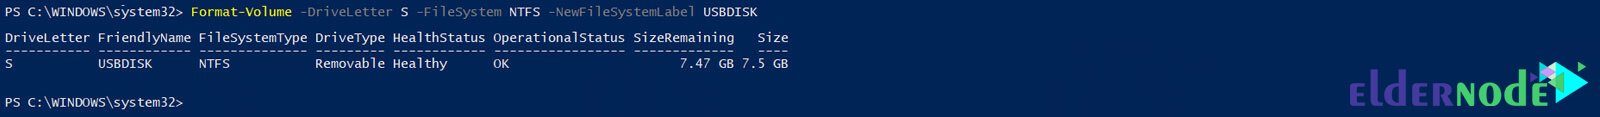 PowerShell commands for working with hard disk